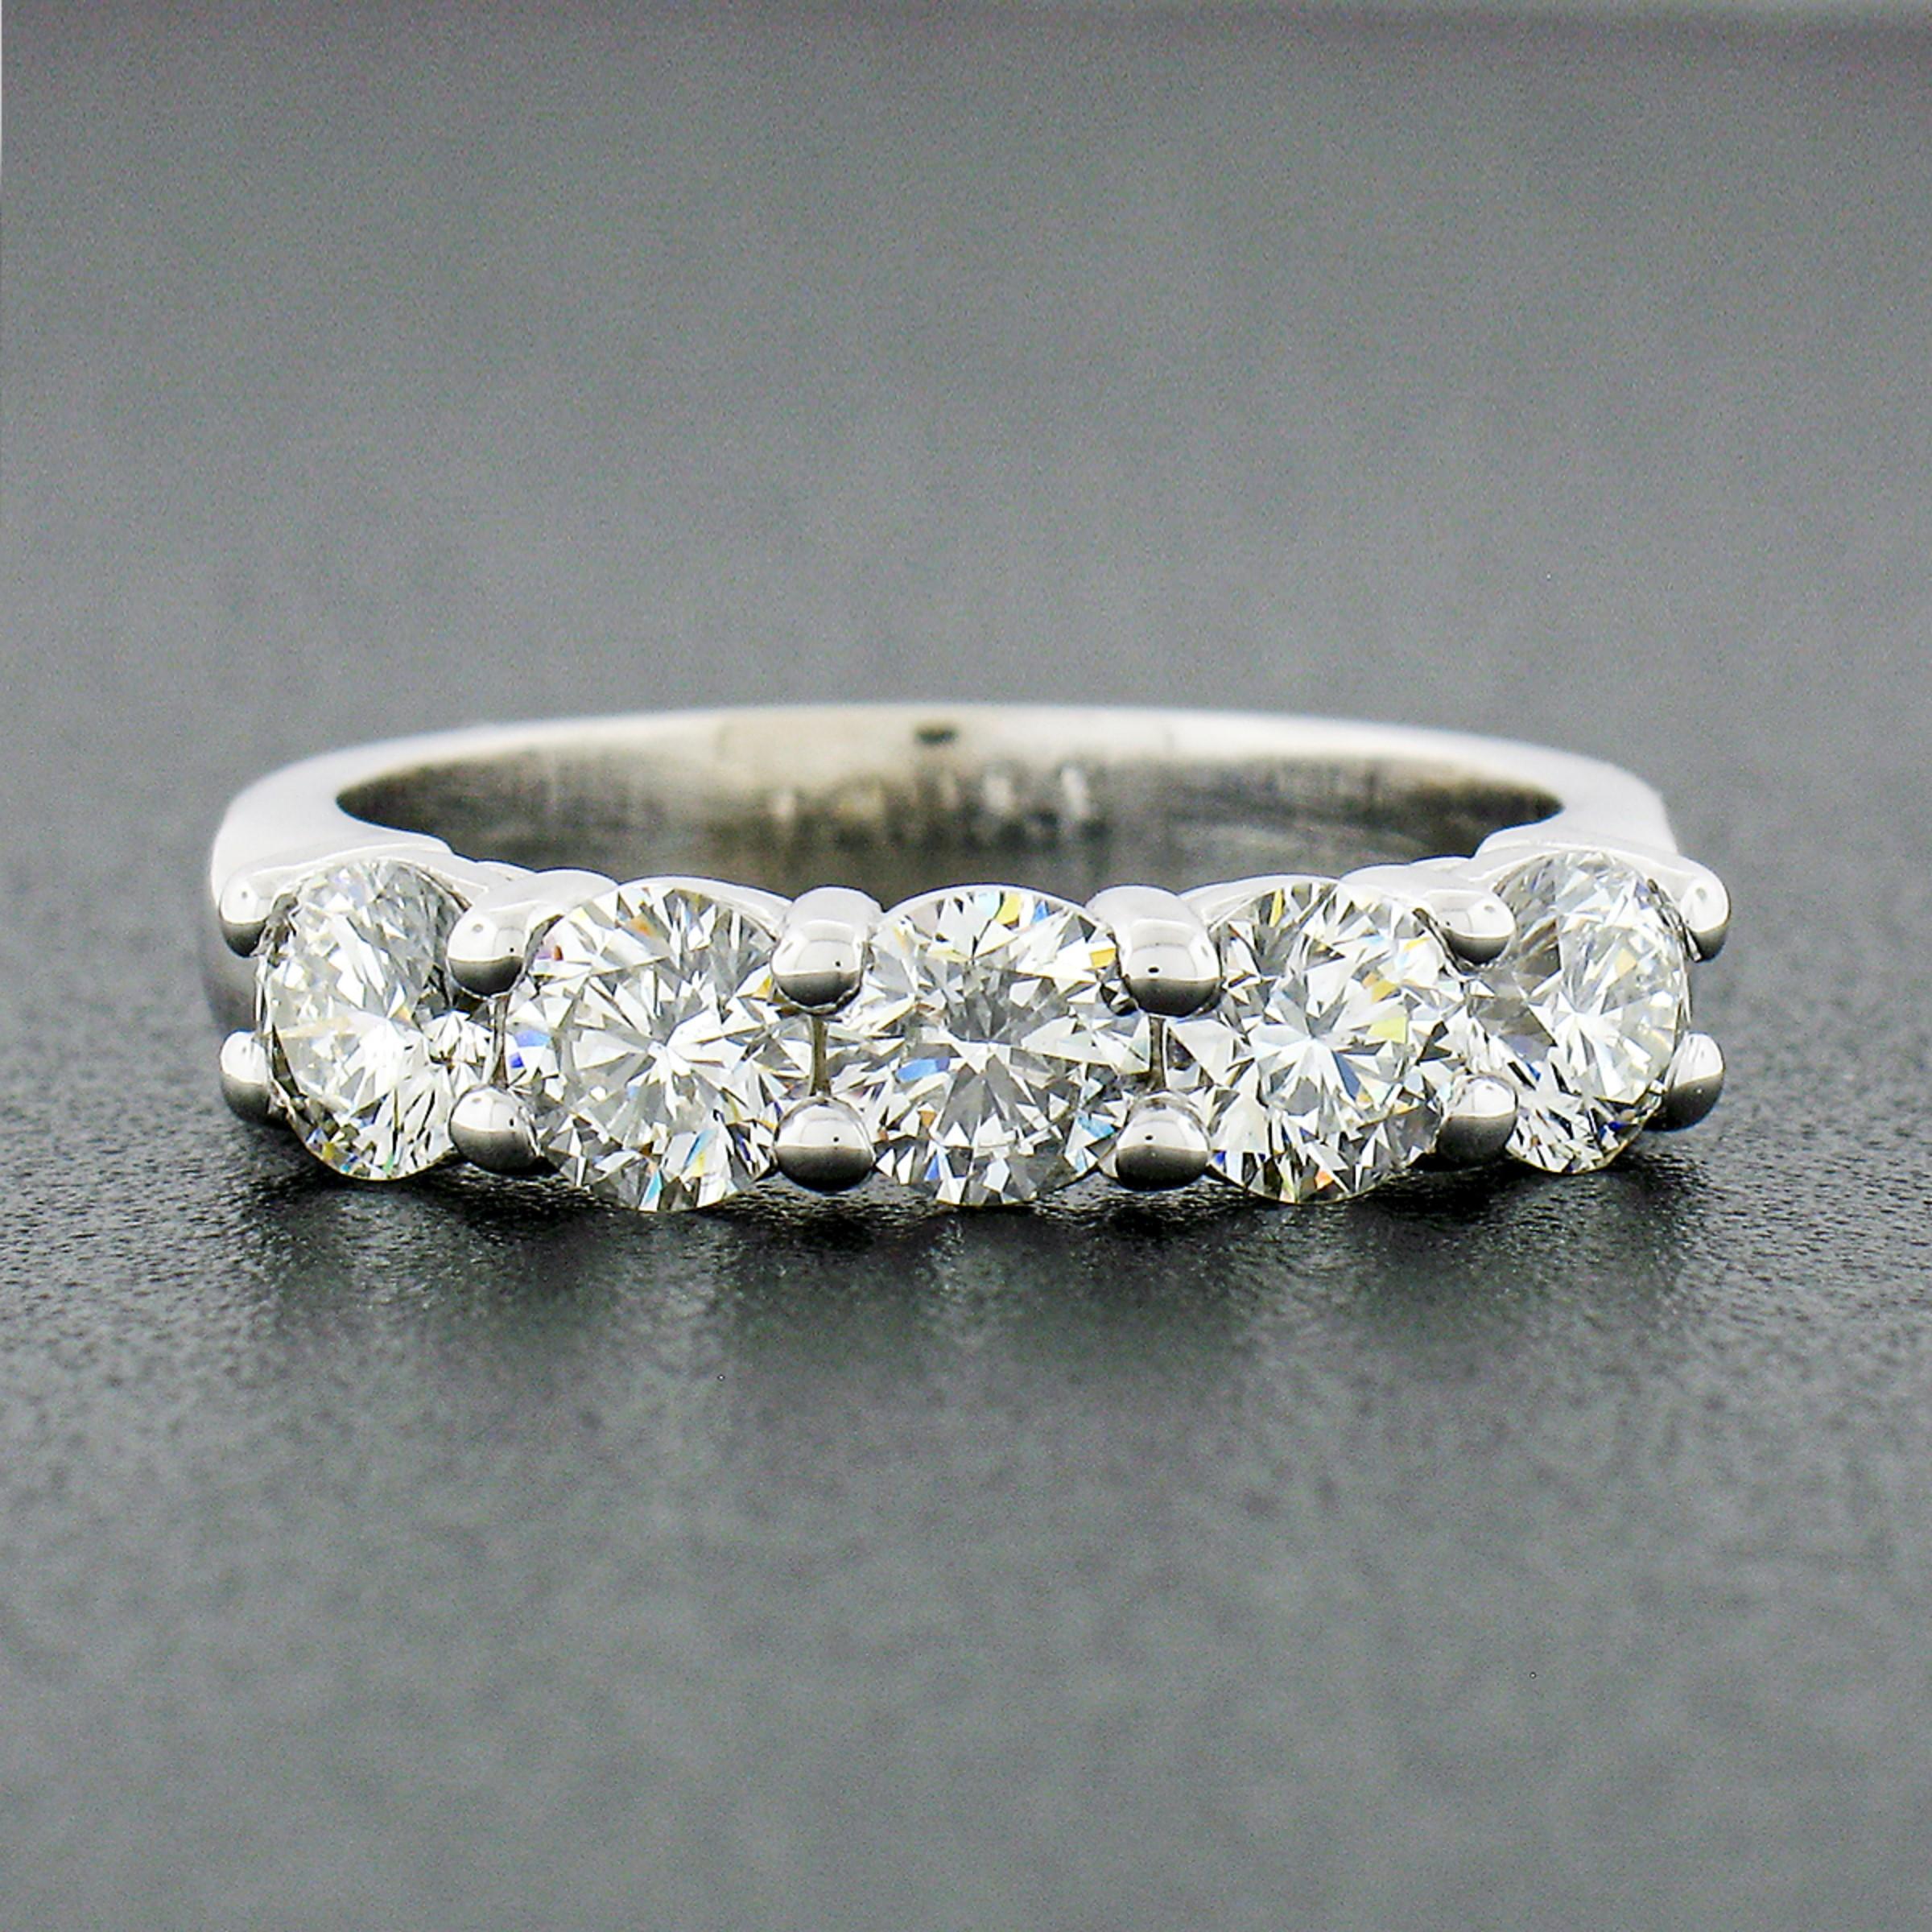 This magnificent diamond band ring was newly crafted from solid 14k white gold and features 5 round brilliant cut diamonds neatly shared-prong set across its top. Each diamond shows a nice large size, weighing exactly 1.38 carats total, and display